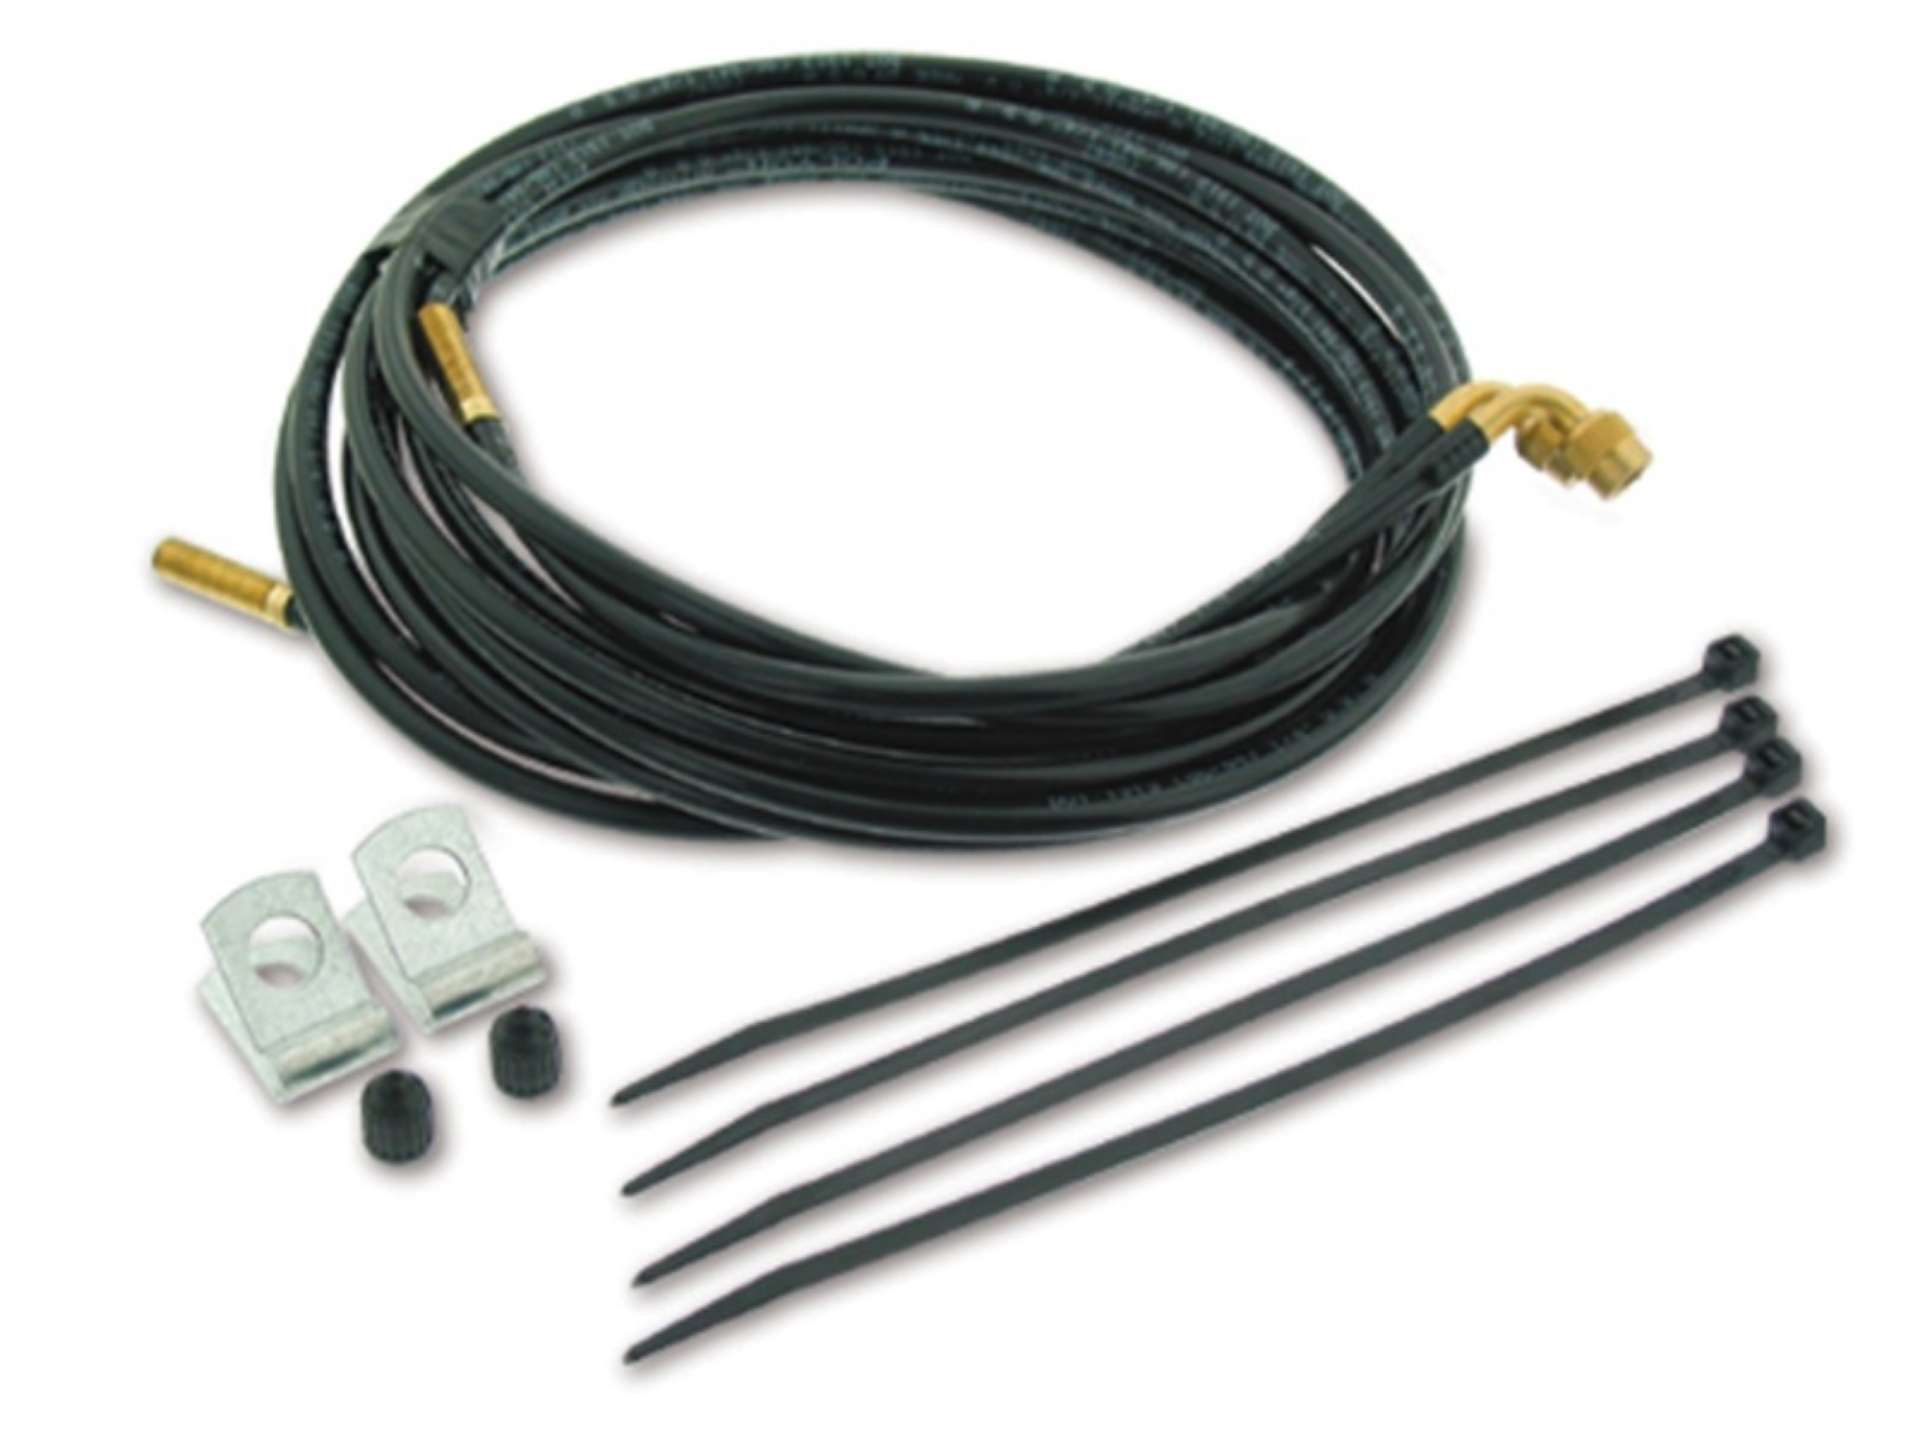 Picture of Air Lift P-30 Hose Kit